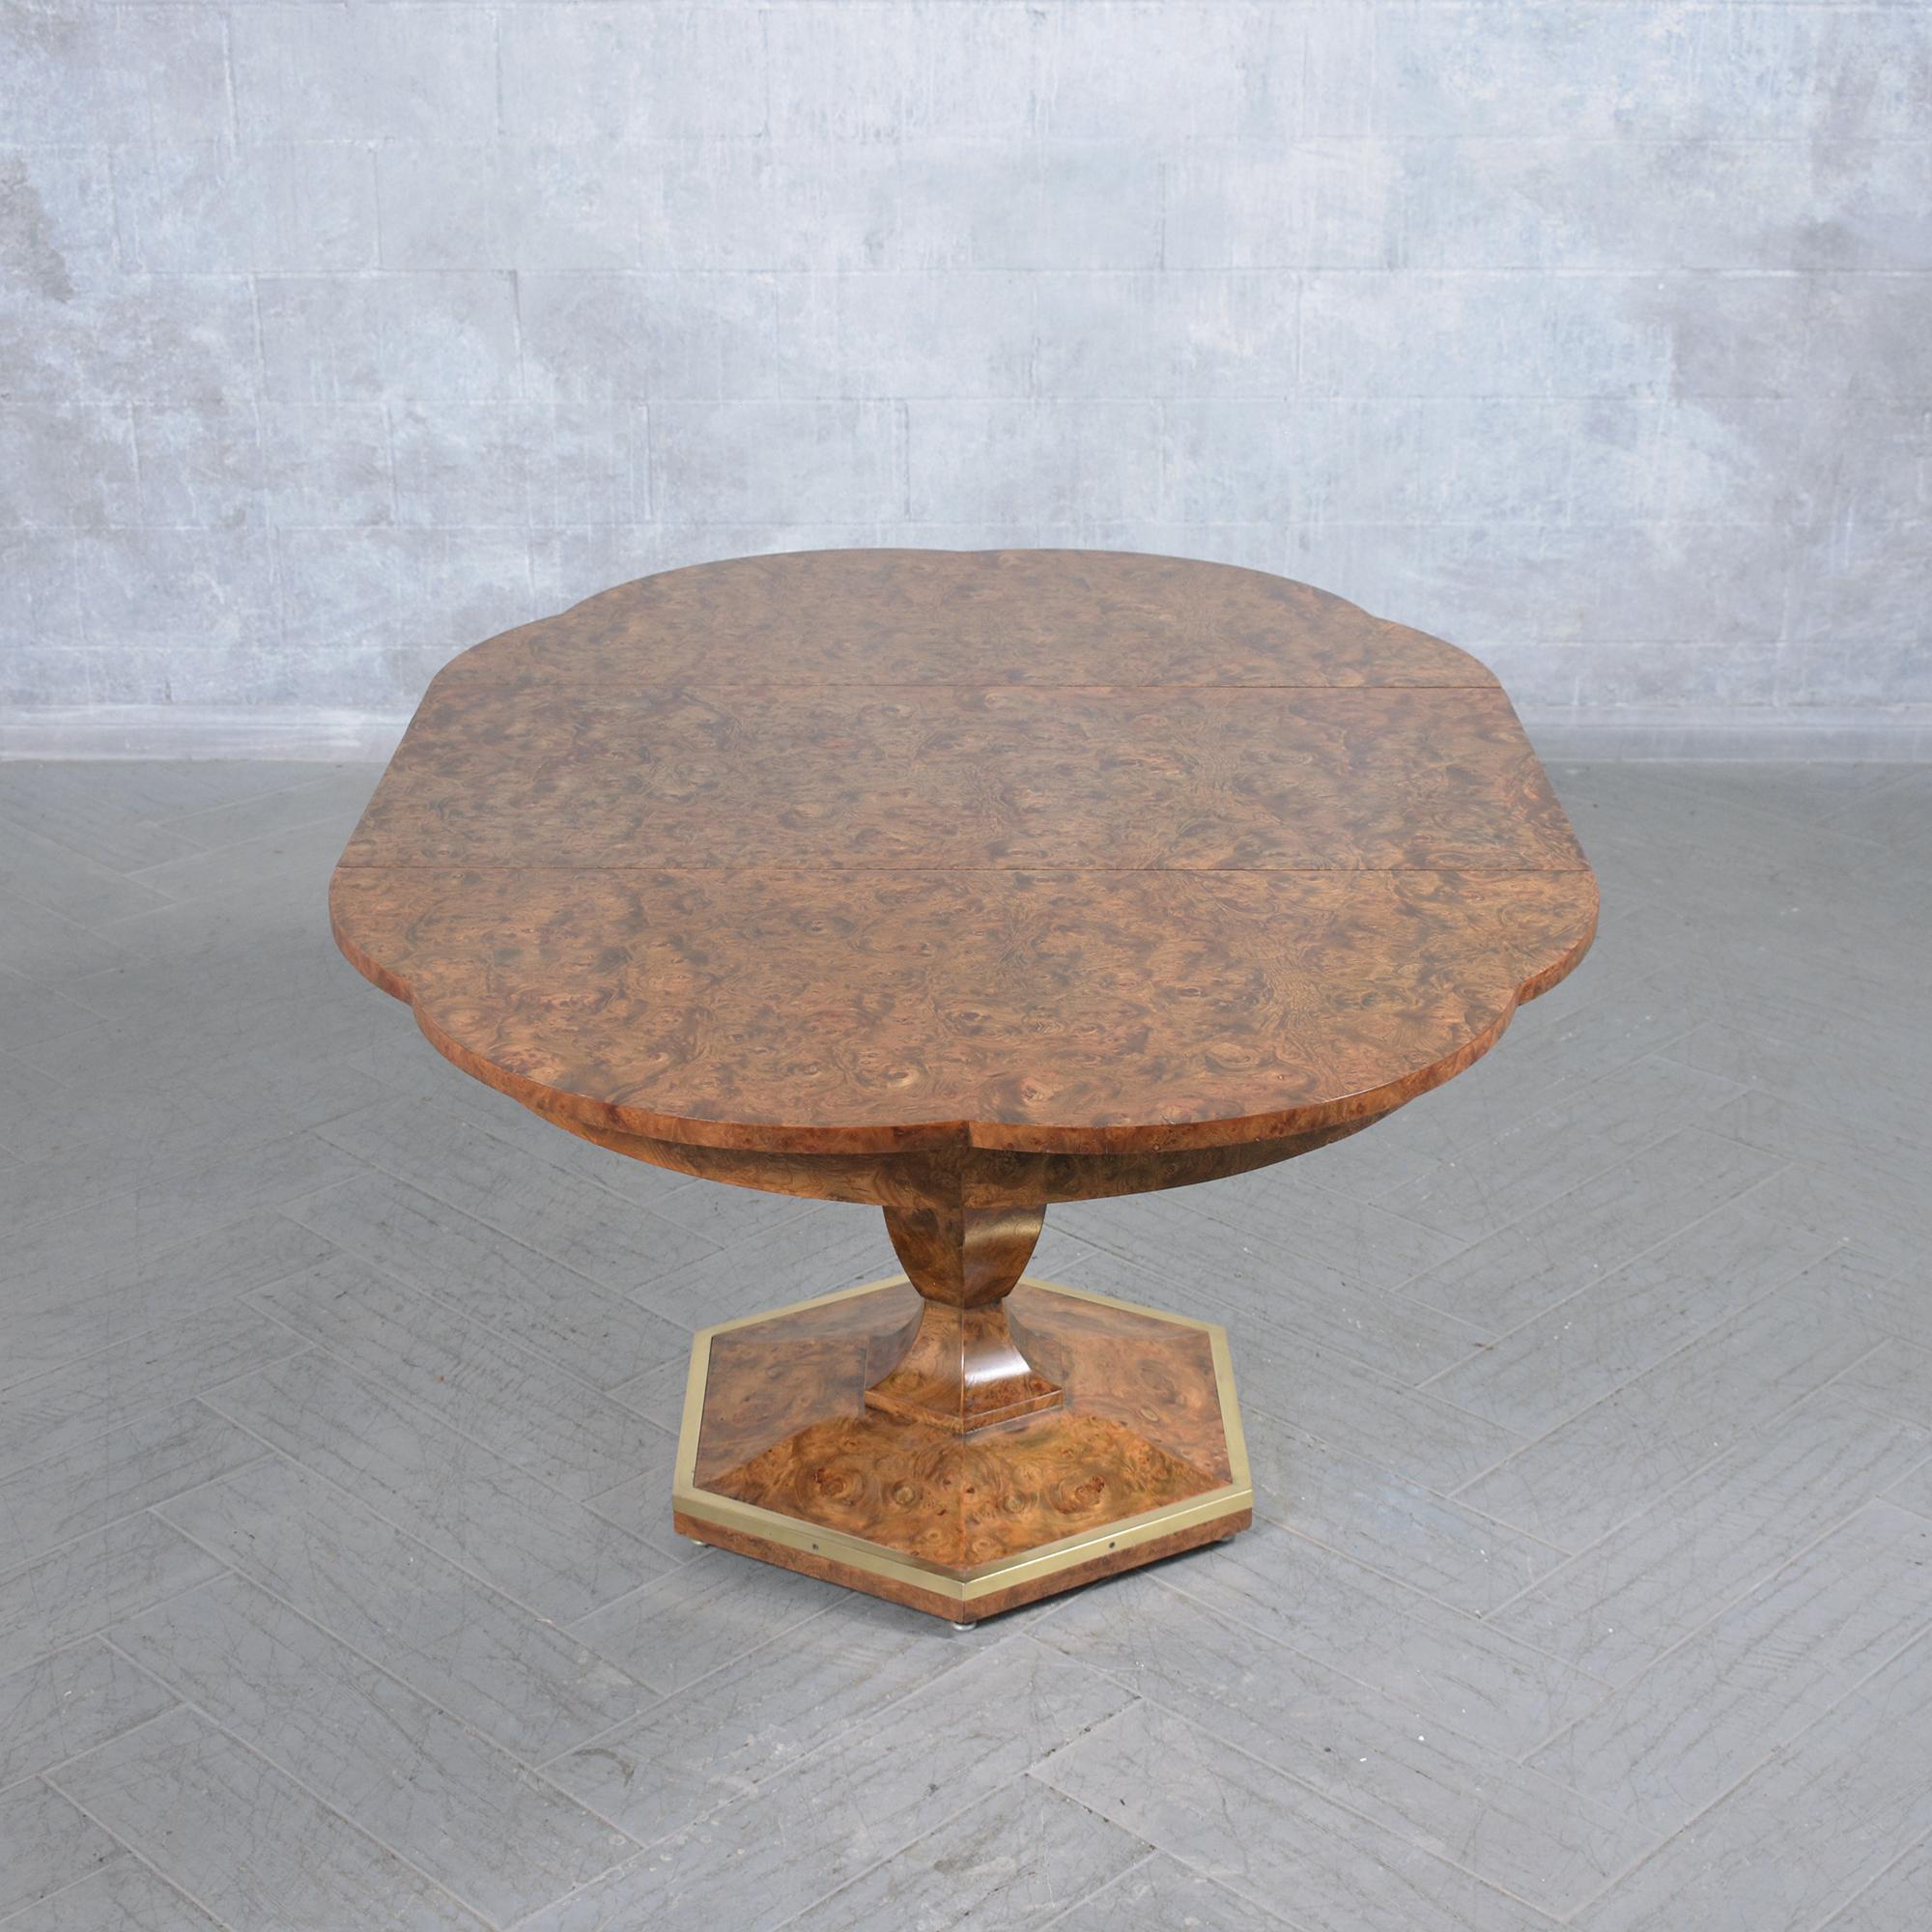 1960s Vintage Extendable Dining Table: Timeless Elegance & Craftsmanship In Good Condition For Sale In Los Angeles, CA